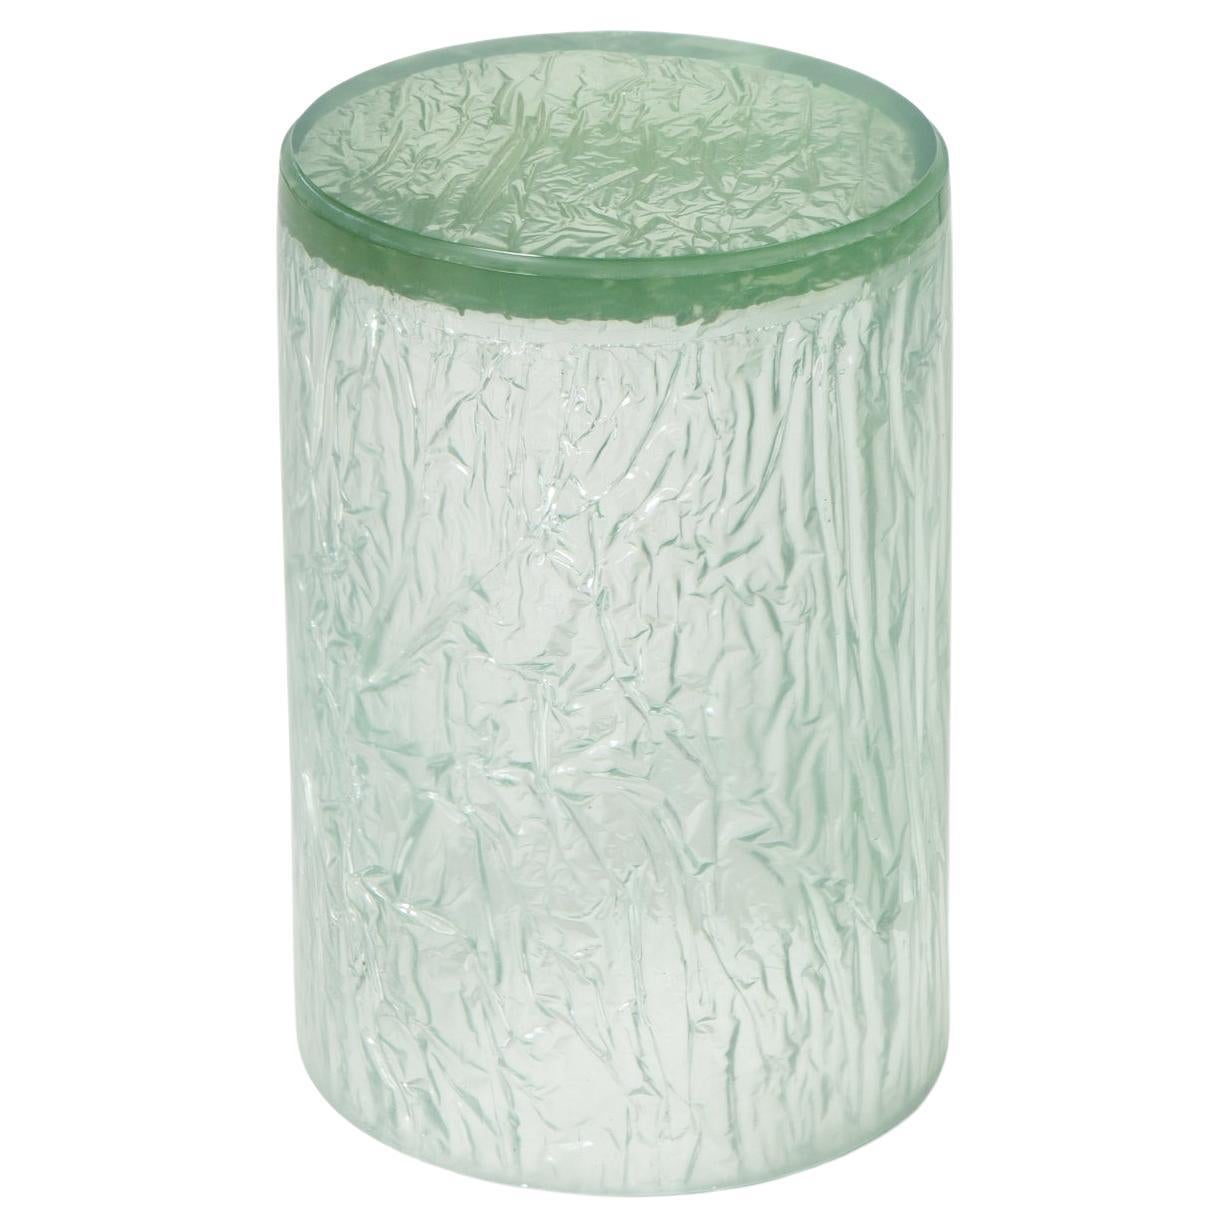 Contemporary Resin Acrylic Side Table or Stool by Natalie Tredgett, Gloss, Green